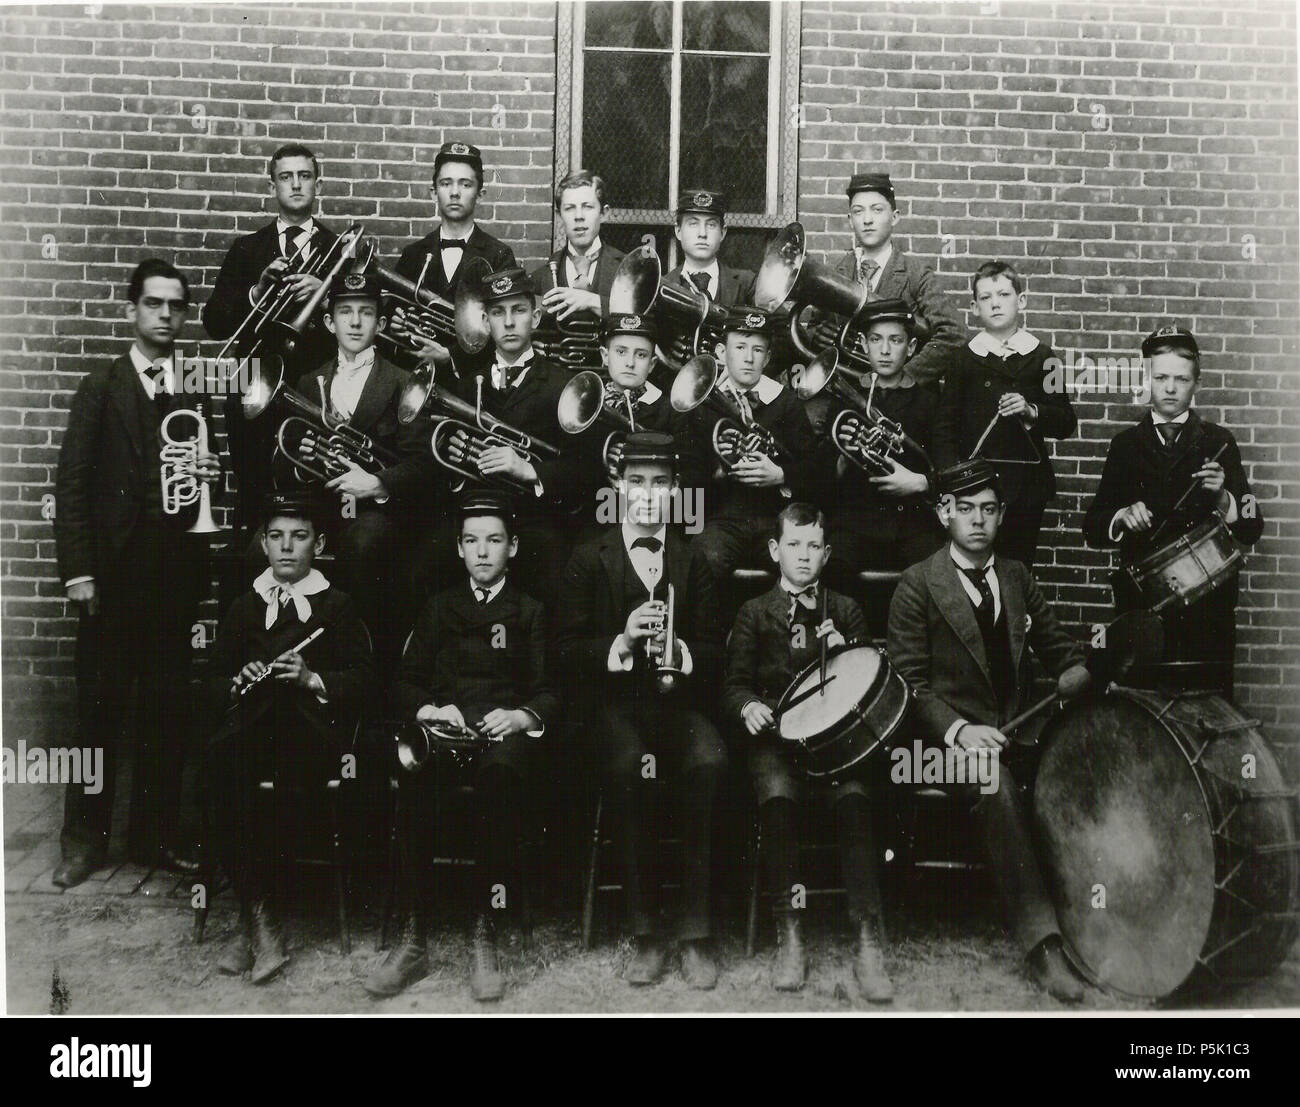 N/A. English: The Christian Brothers Band c1890 under the direction of W. W. Saxby, Jr. 23 May 2011. Unknown 31 1890c Christian Brothers Band Stock Photo